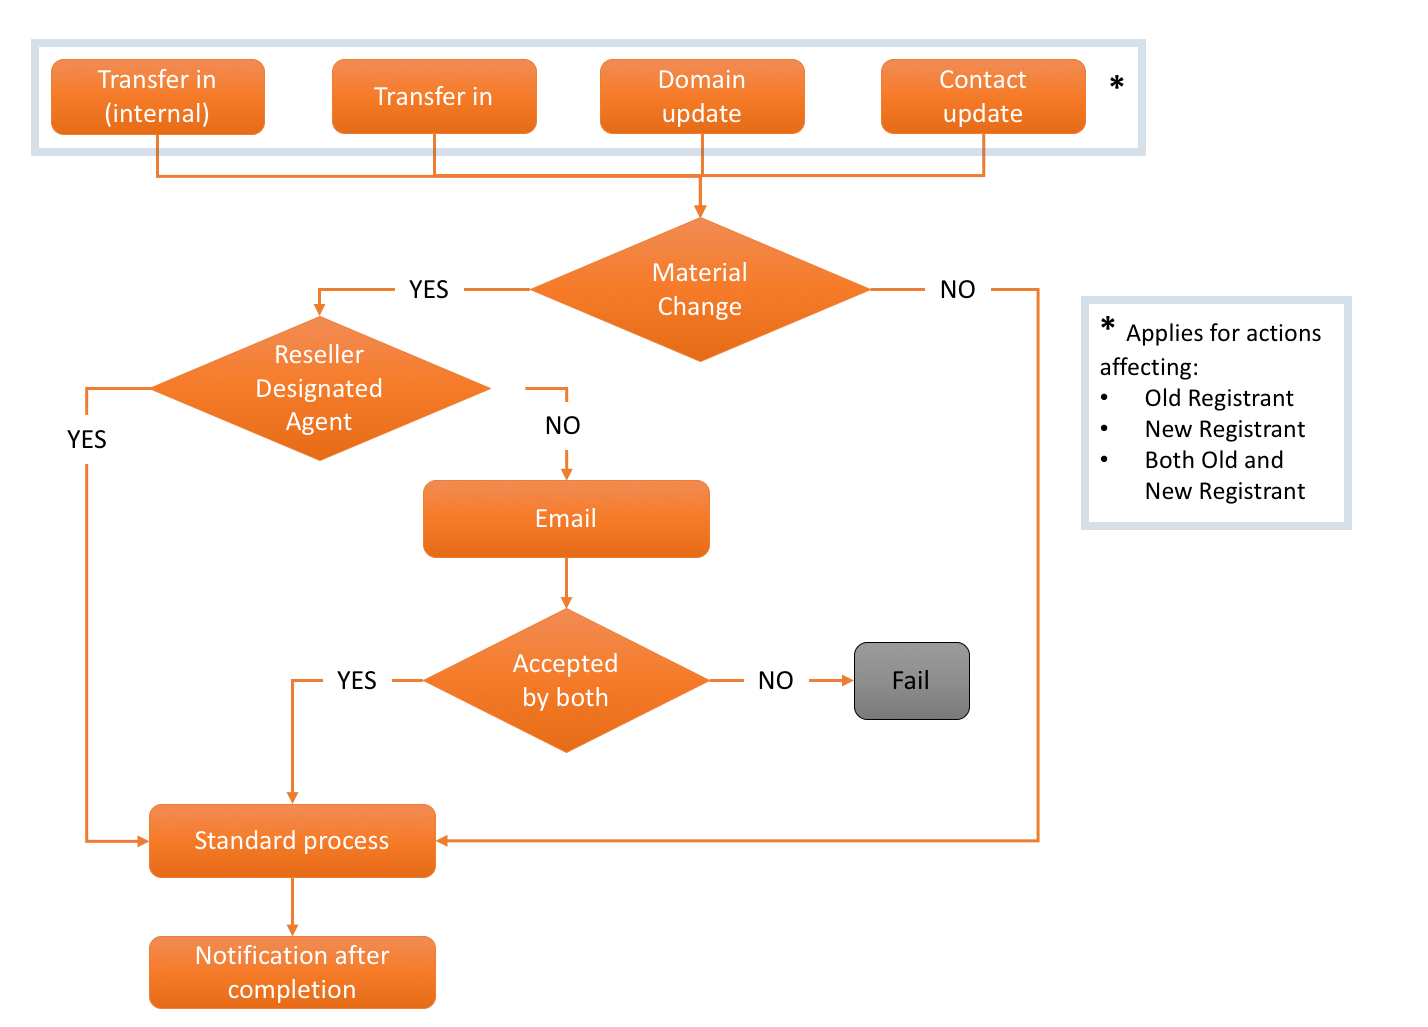 Simplified flowchart of the IRTP-C affected operations